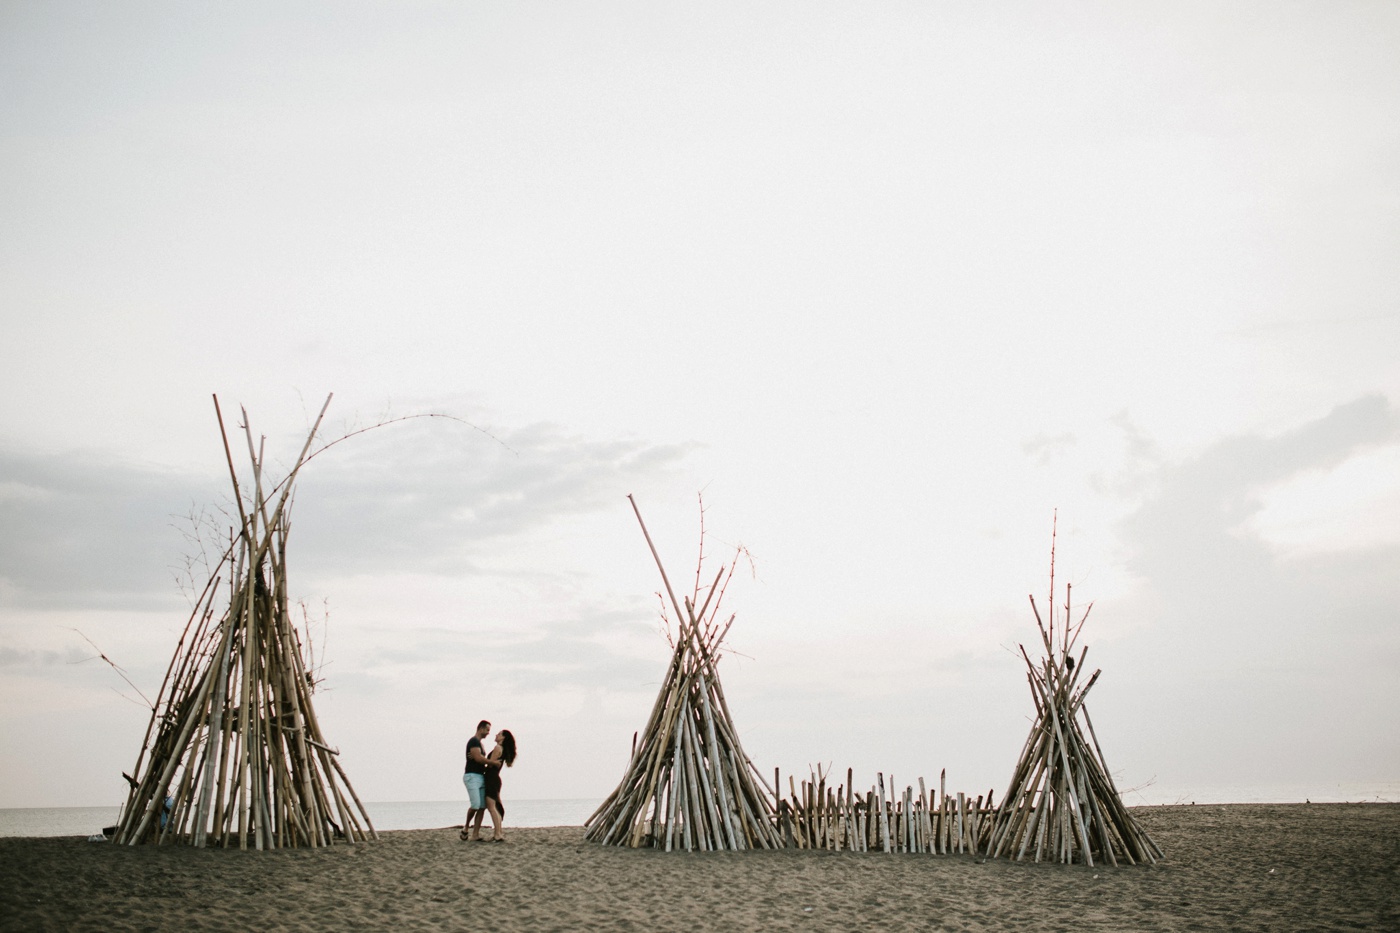 Deb-Ibs_Bali-Beach-Relaxed-Engagement-Session_Destination-Wedding-Photography_Melbourne-Wedding-Photographer_08